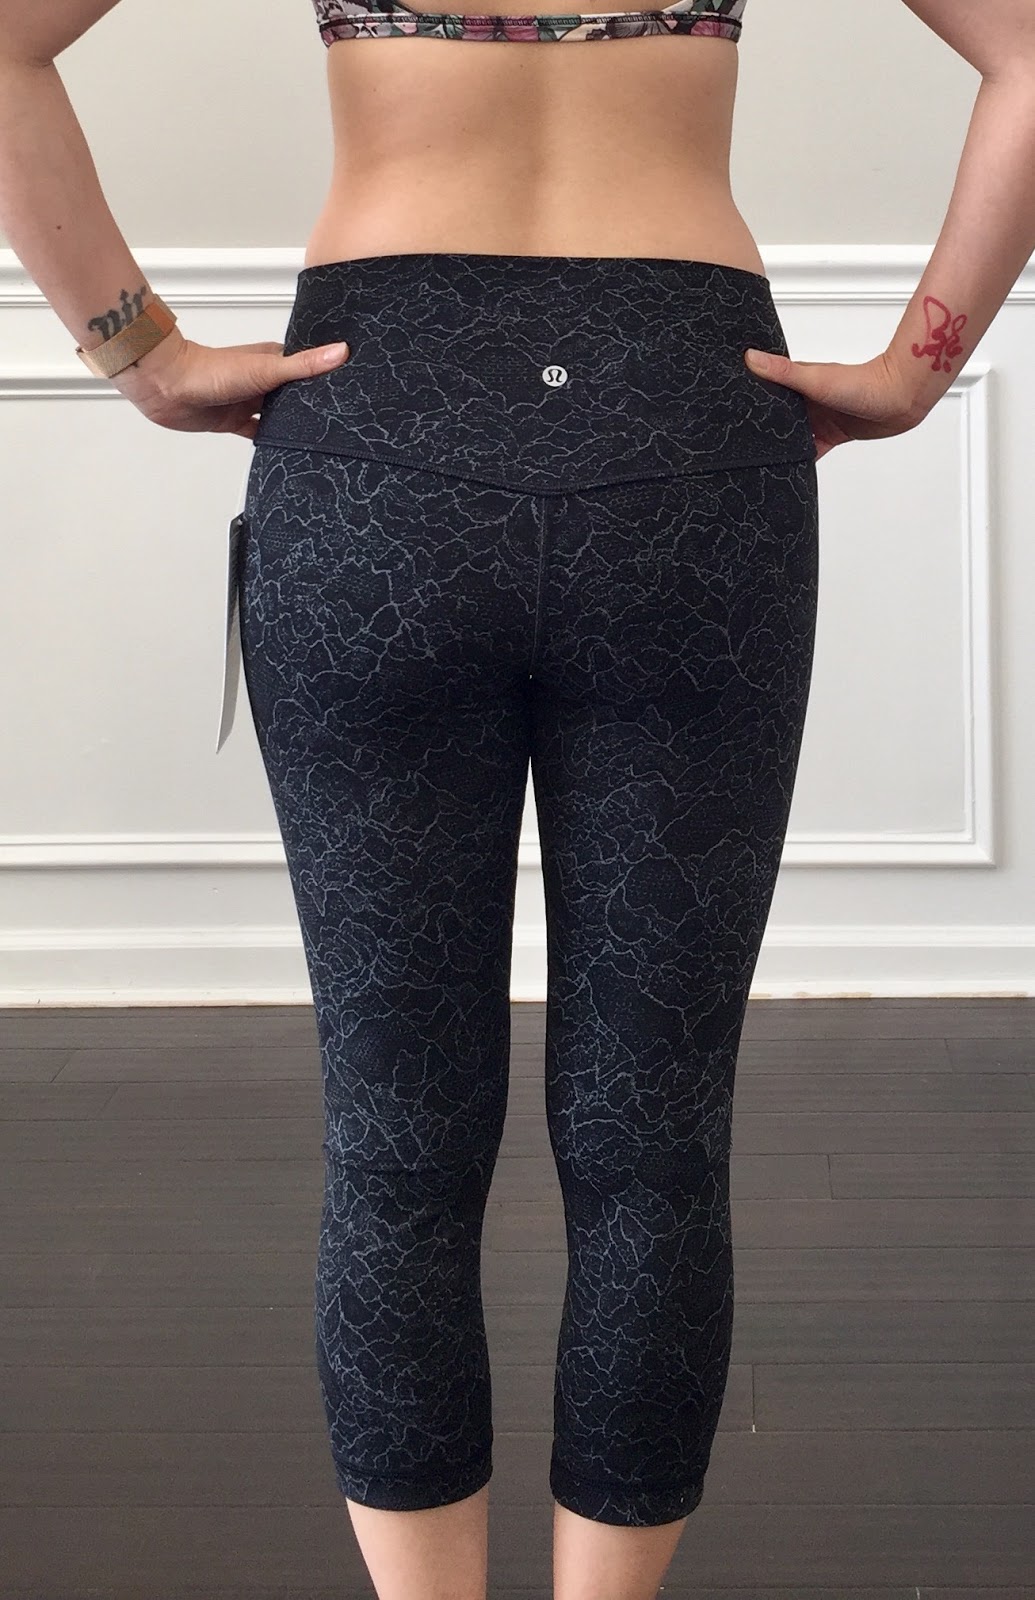 lululemon in movement tight review